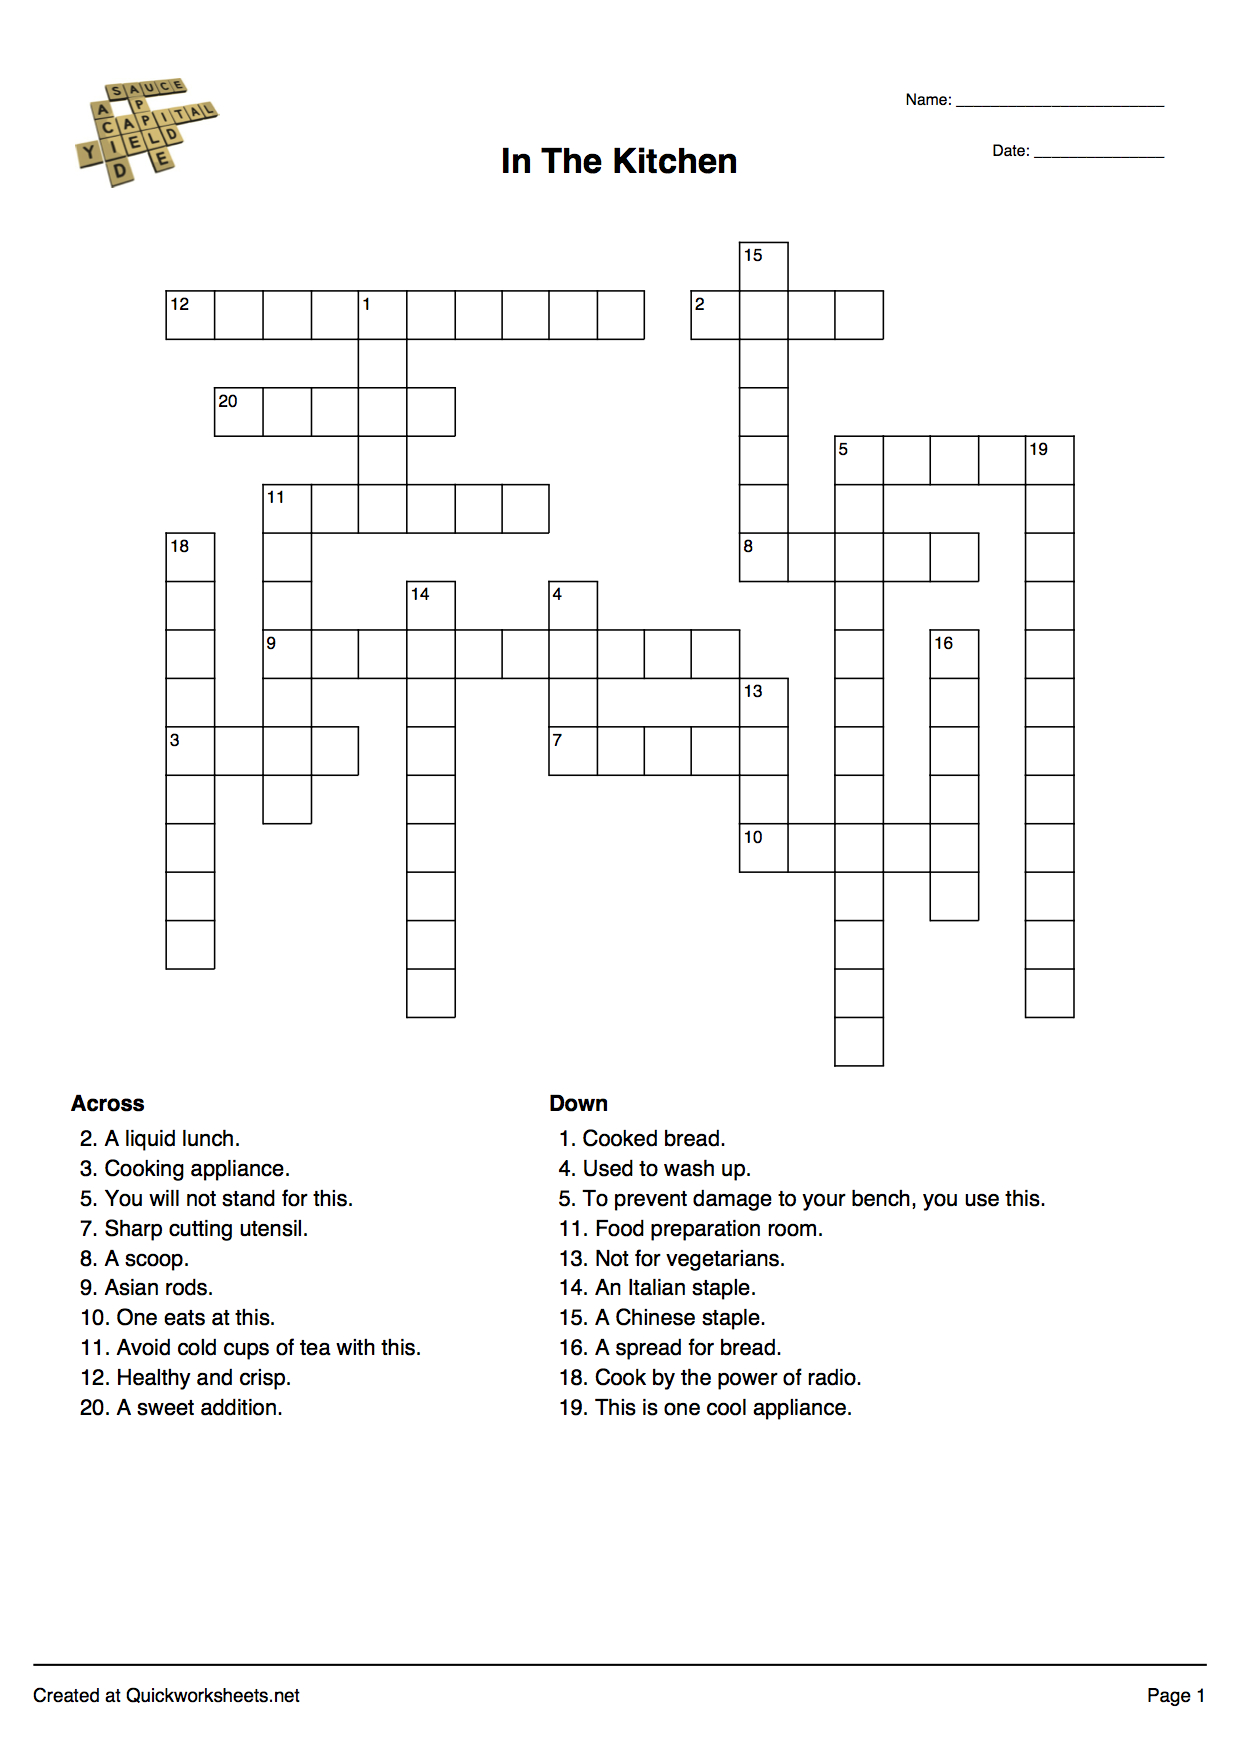 Word Scramble, Wordsearch, Crossword, Matching Pairs And Other - Printable Quiz Crossword